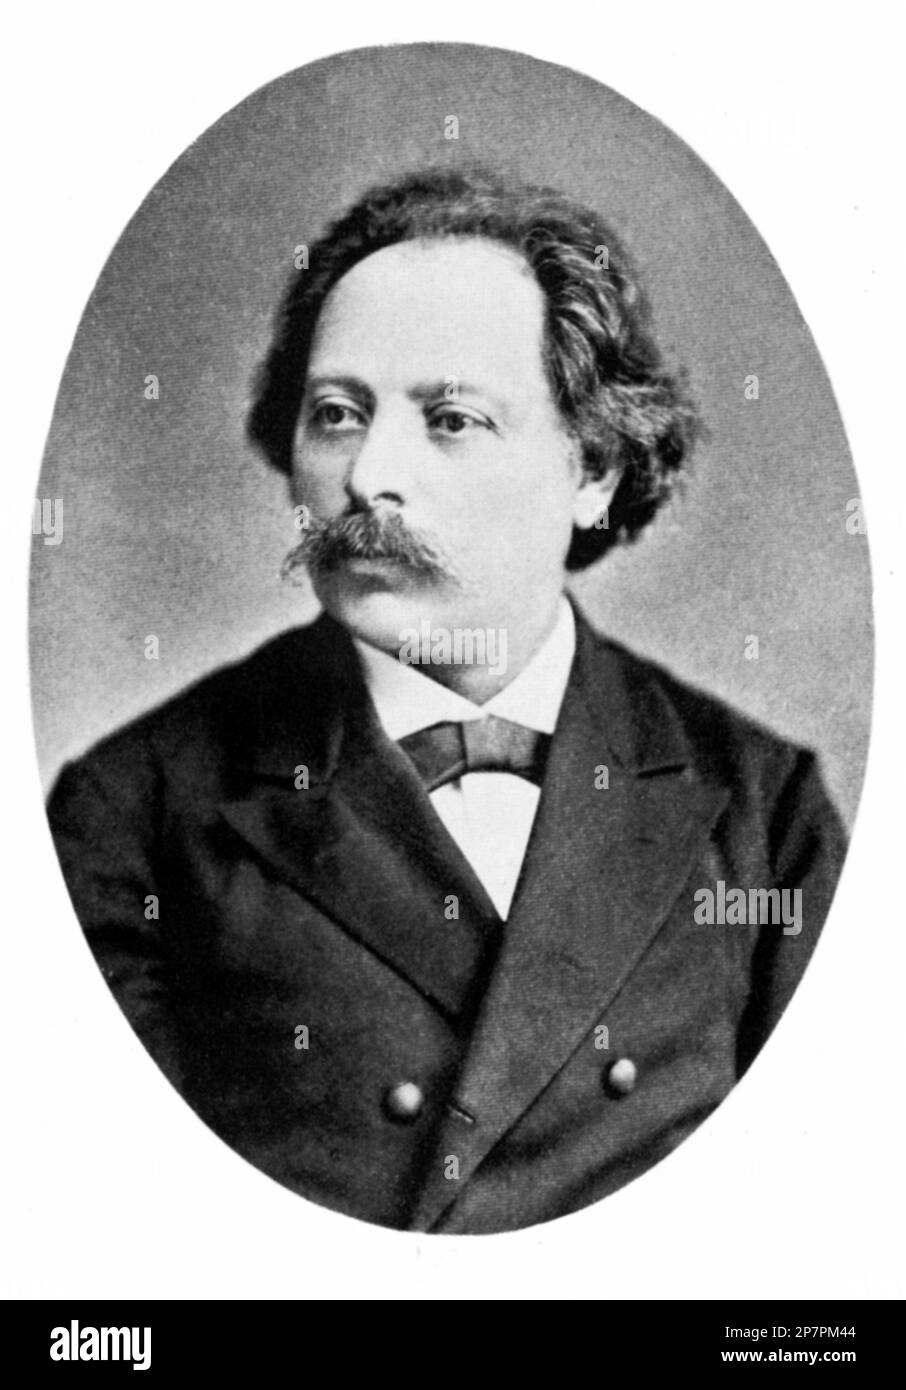 1875 c, AUSTRIA : The hungarian music composer KARL GOLDMARK ( 1830 - 1915 ), active in Vienna . Wrote Operas , orchestral and chamber music , etc. His Opera THE QUEEN OF SHEBA and his RUSTIC WEDDING SYMPHONY are still performed . Photo by J. Lowy , Vienna .  - COMPOSITORE - OPERA LIRICA - CLASSICA - CLASSICAL - PORTRAIT - RITRATTO - MUSICISTA - MUSICA  - baffi - moustache - collar - colletto -CRAVATTA - TIE - -- ARCHIVIO GBB Stock Photo